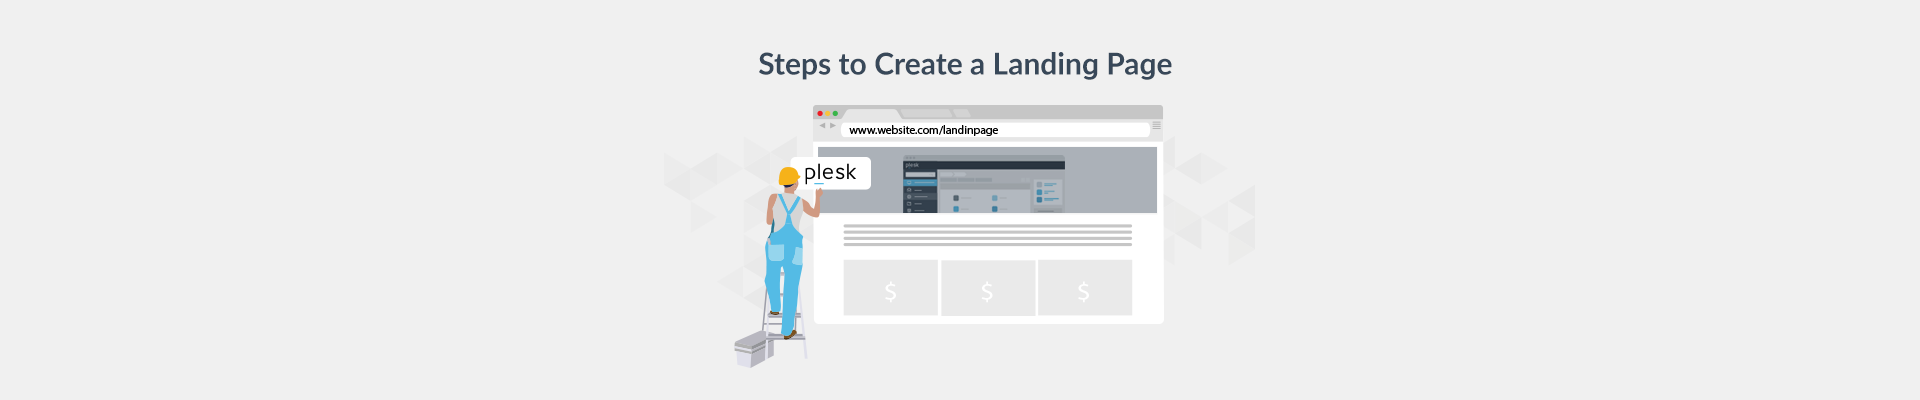 Tips for Creating an Effective Landing Page - Plesk